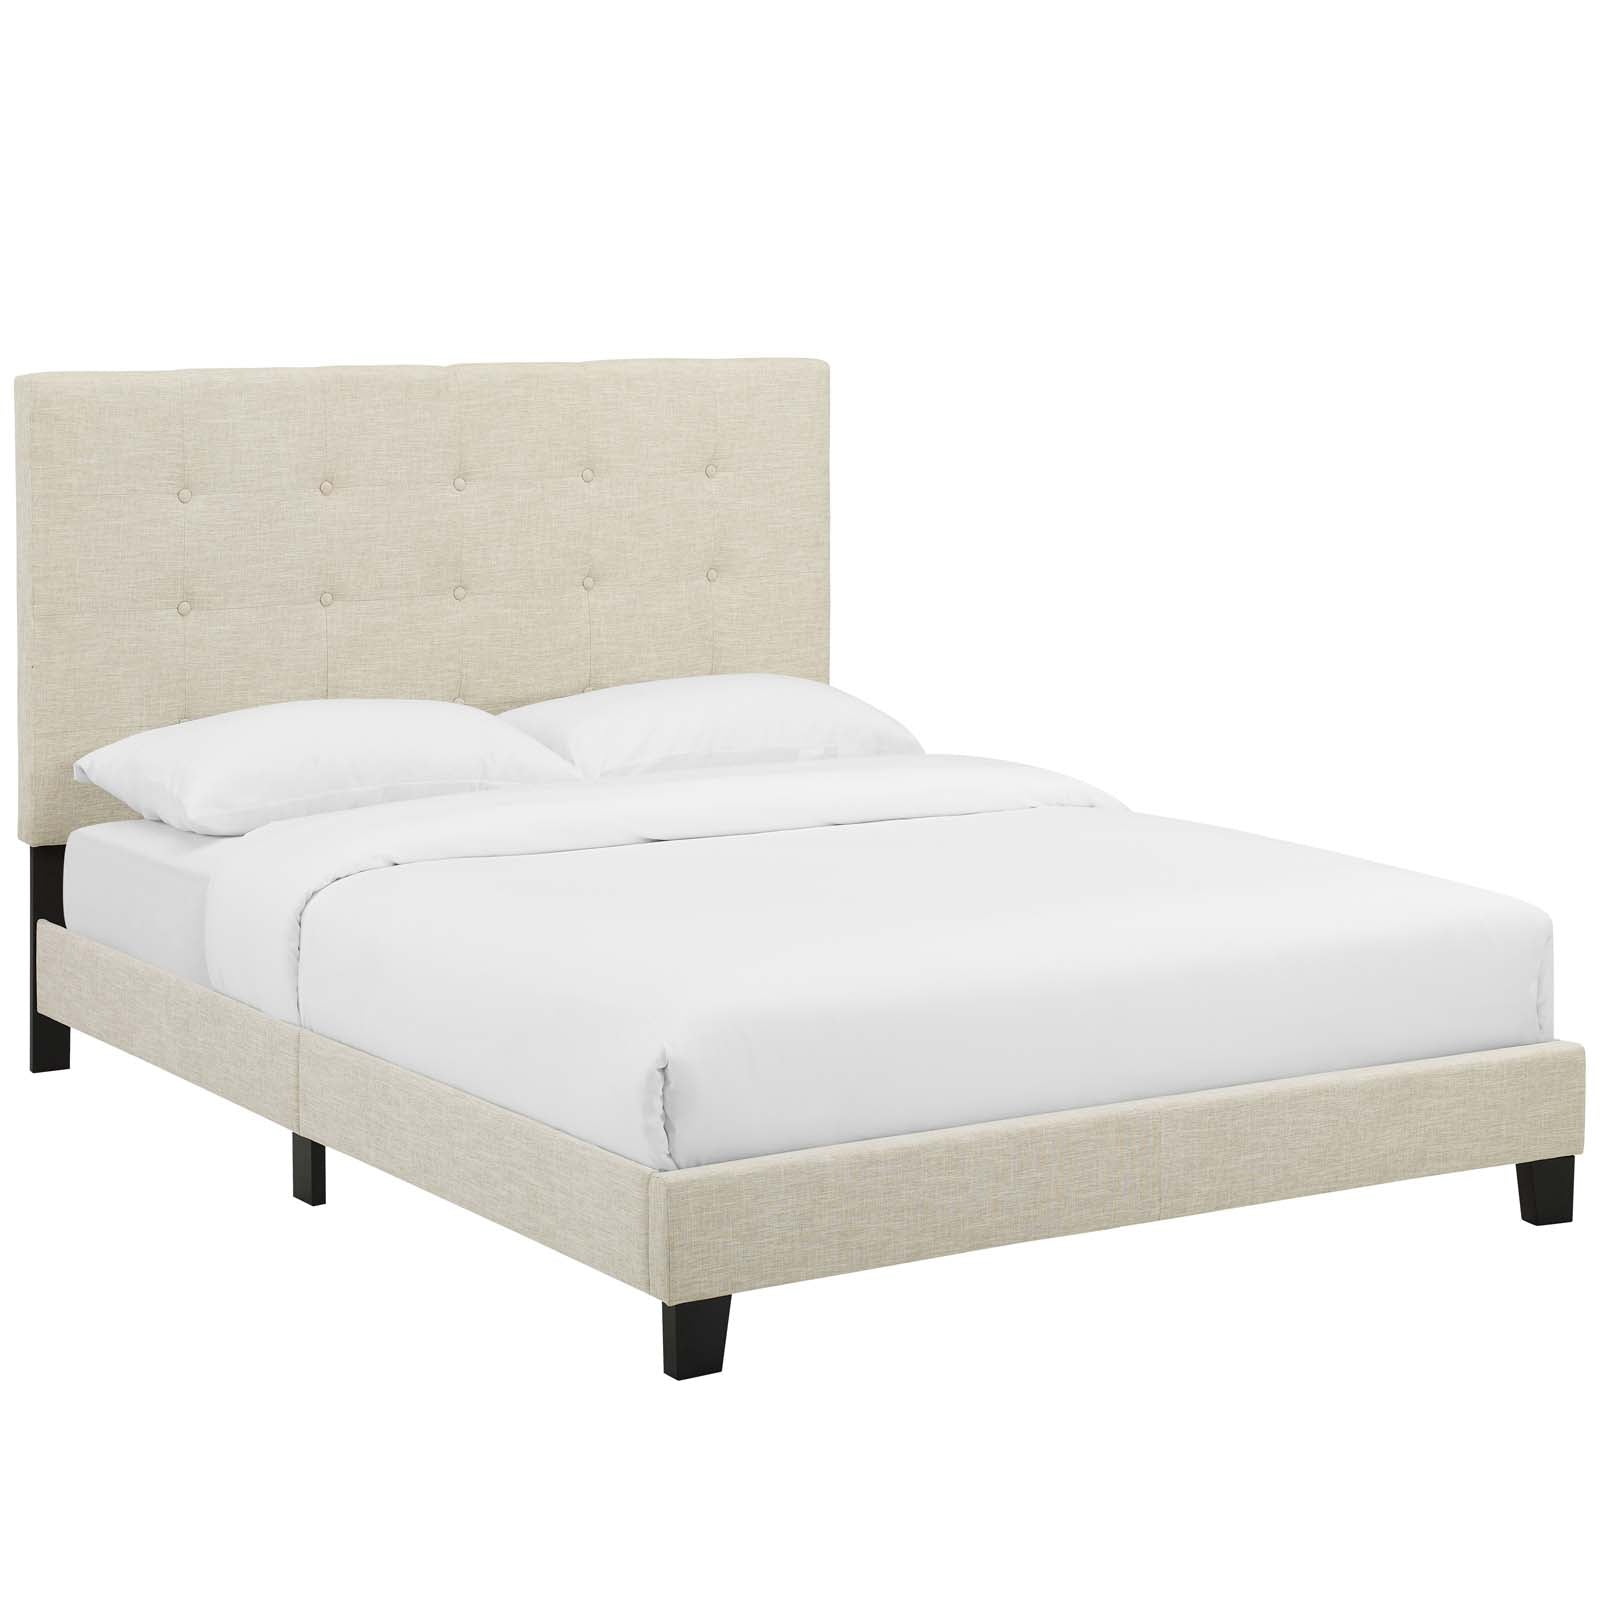 Melanie King Tufted Button Upholstered Fabric Platform Bed